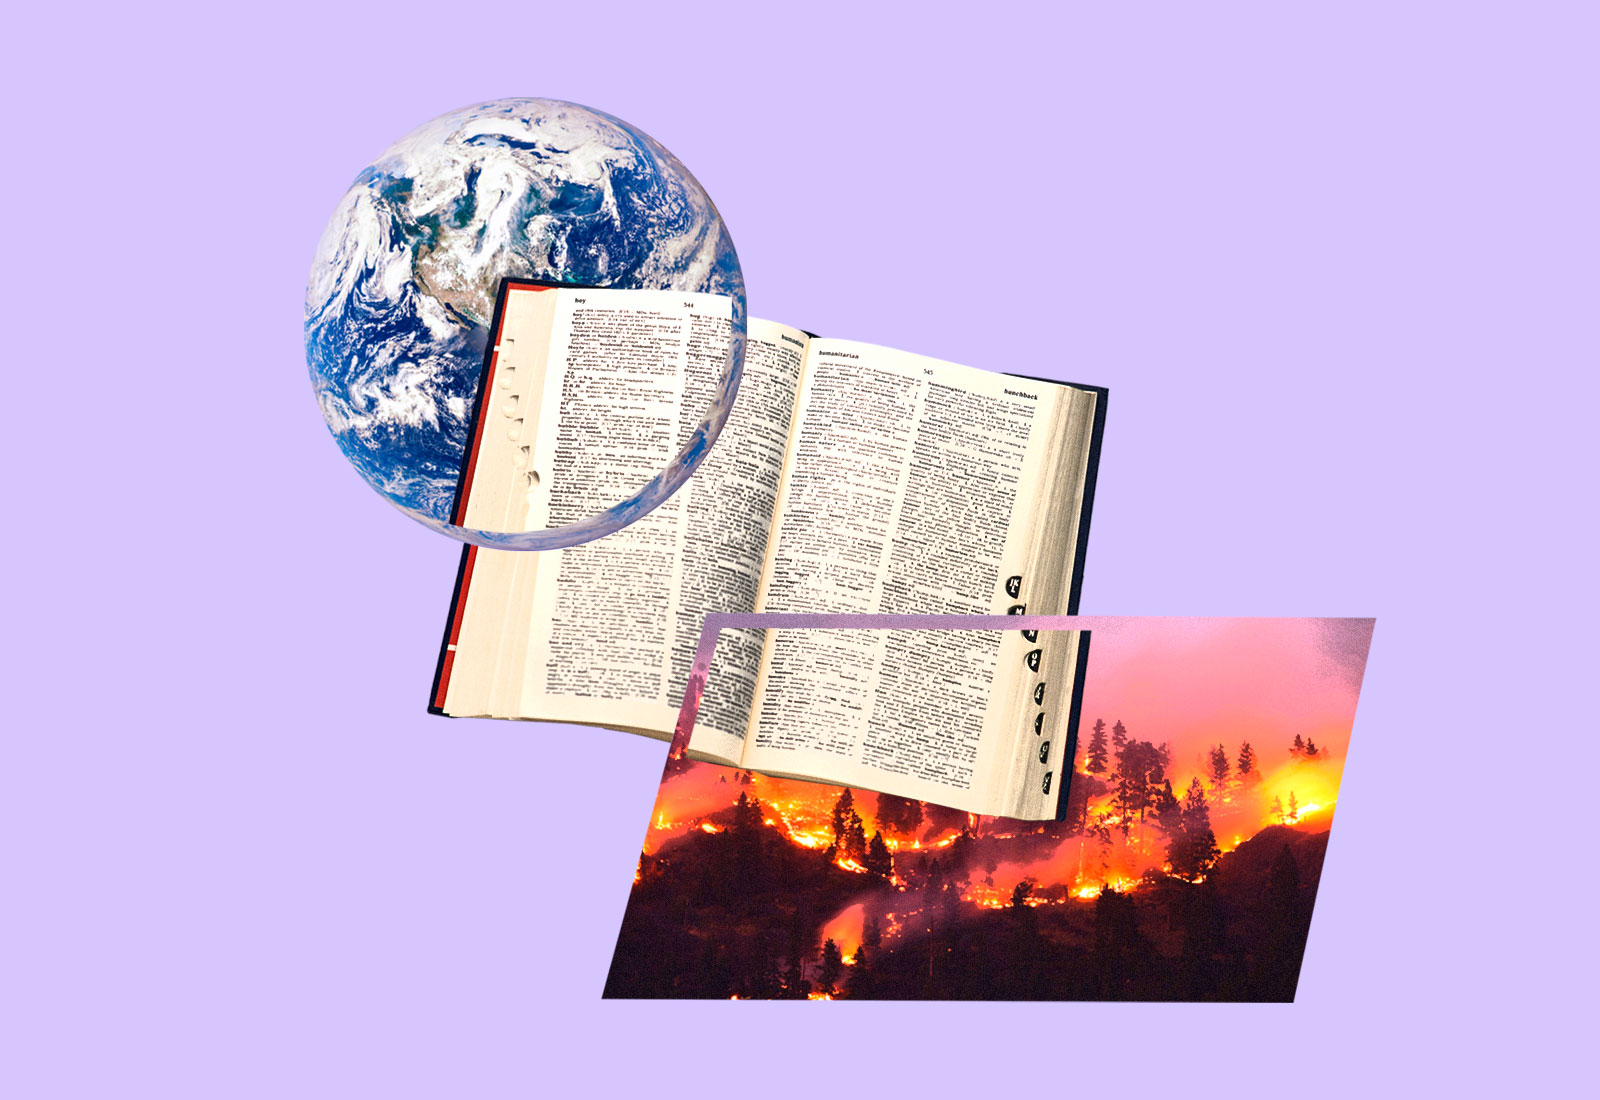 Planet Earth, a dictionary, and a forest fire overlapped on one another